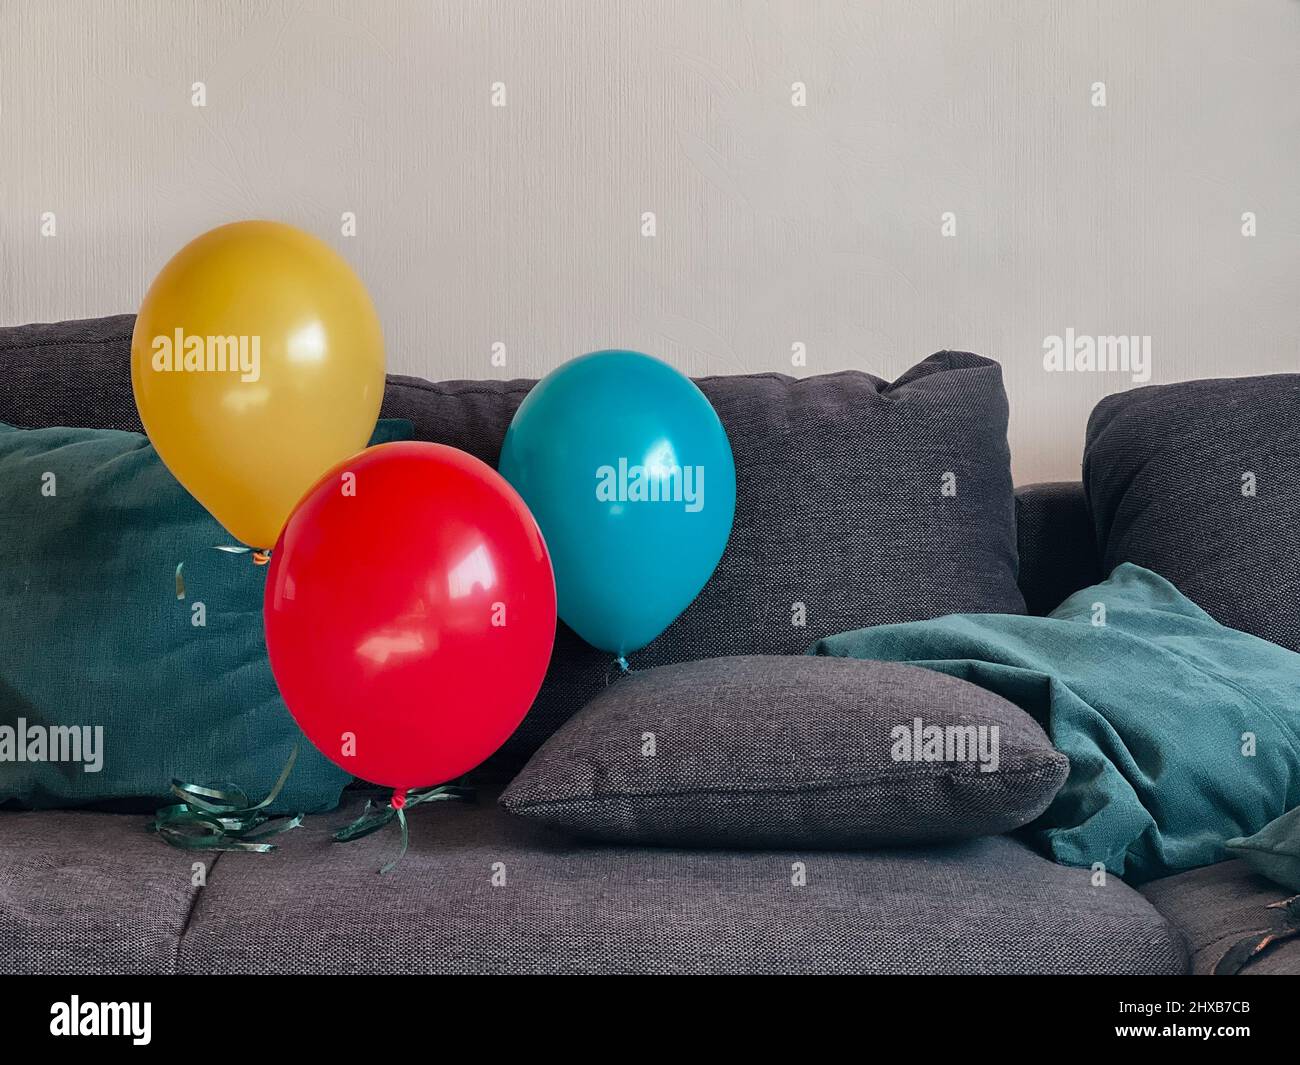 Three balloons yellow red and blue floating above the couch Stock Photo